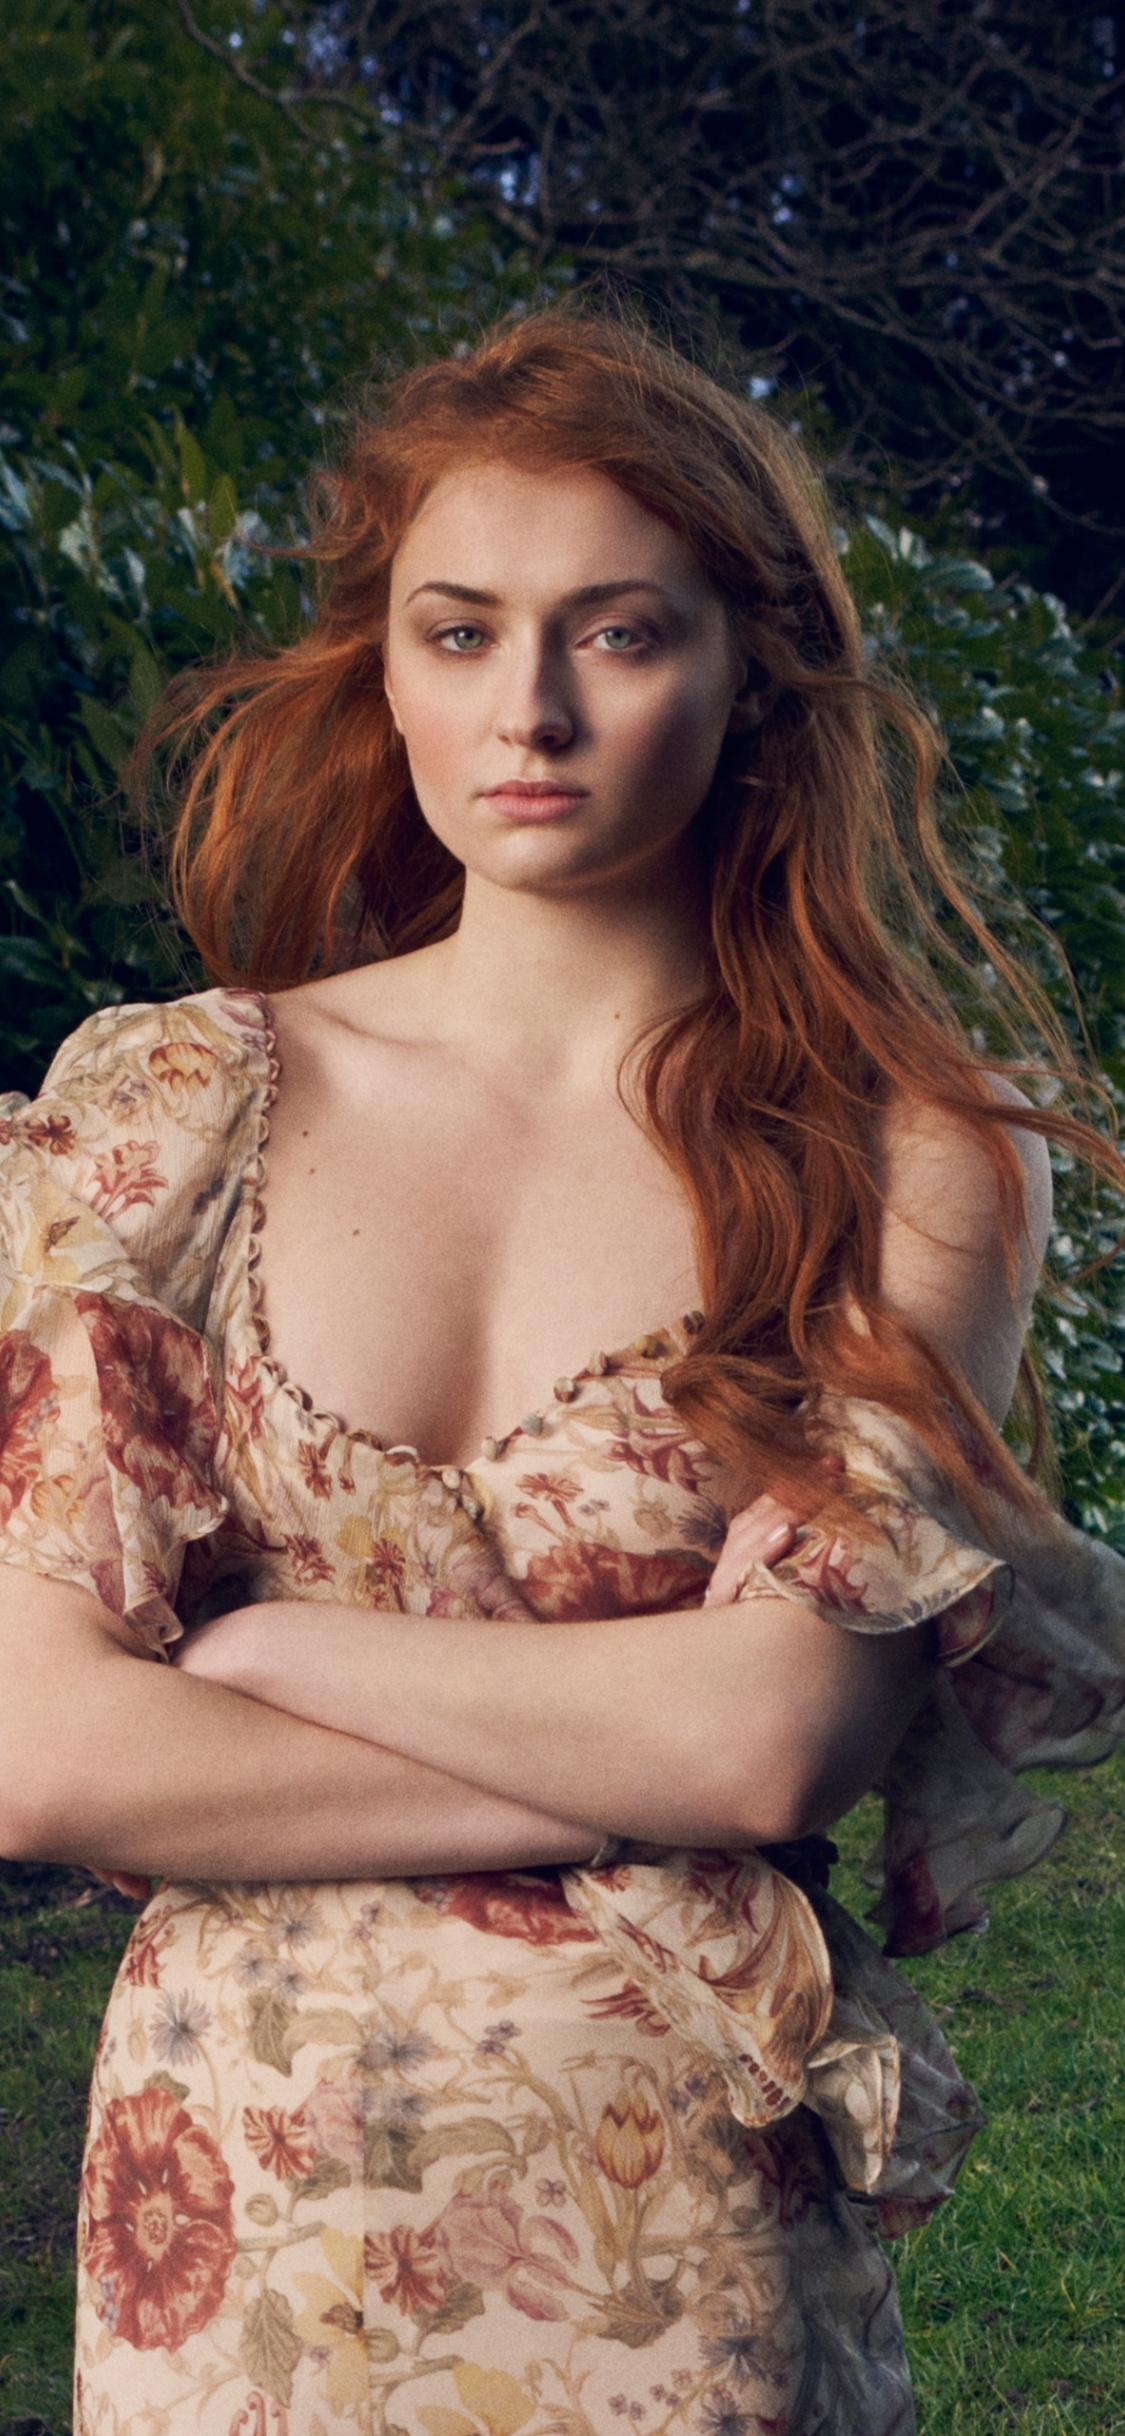 Download wallpaper 1125x2436 sophie turner, red head, photoshoot, 2018,  iphone x, 1125x2436 hd background, 5166